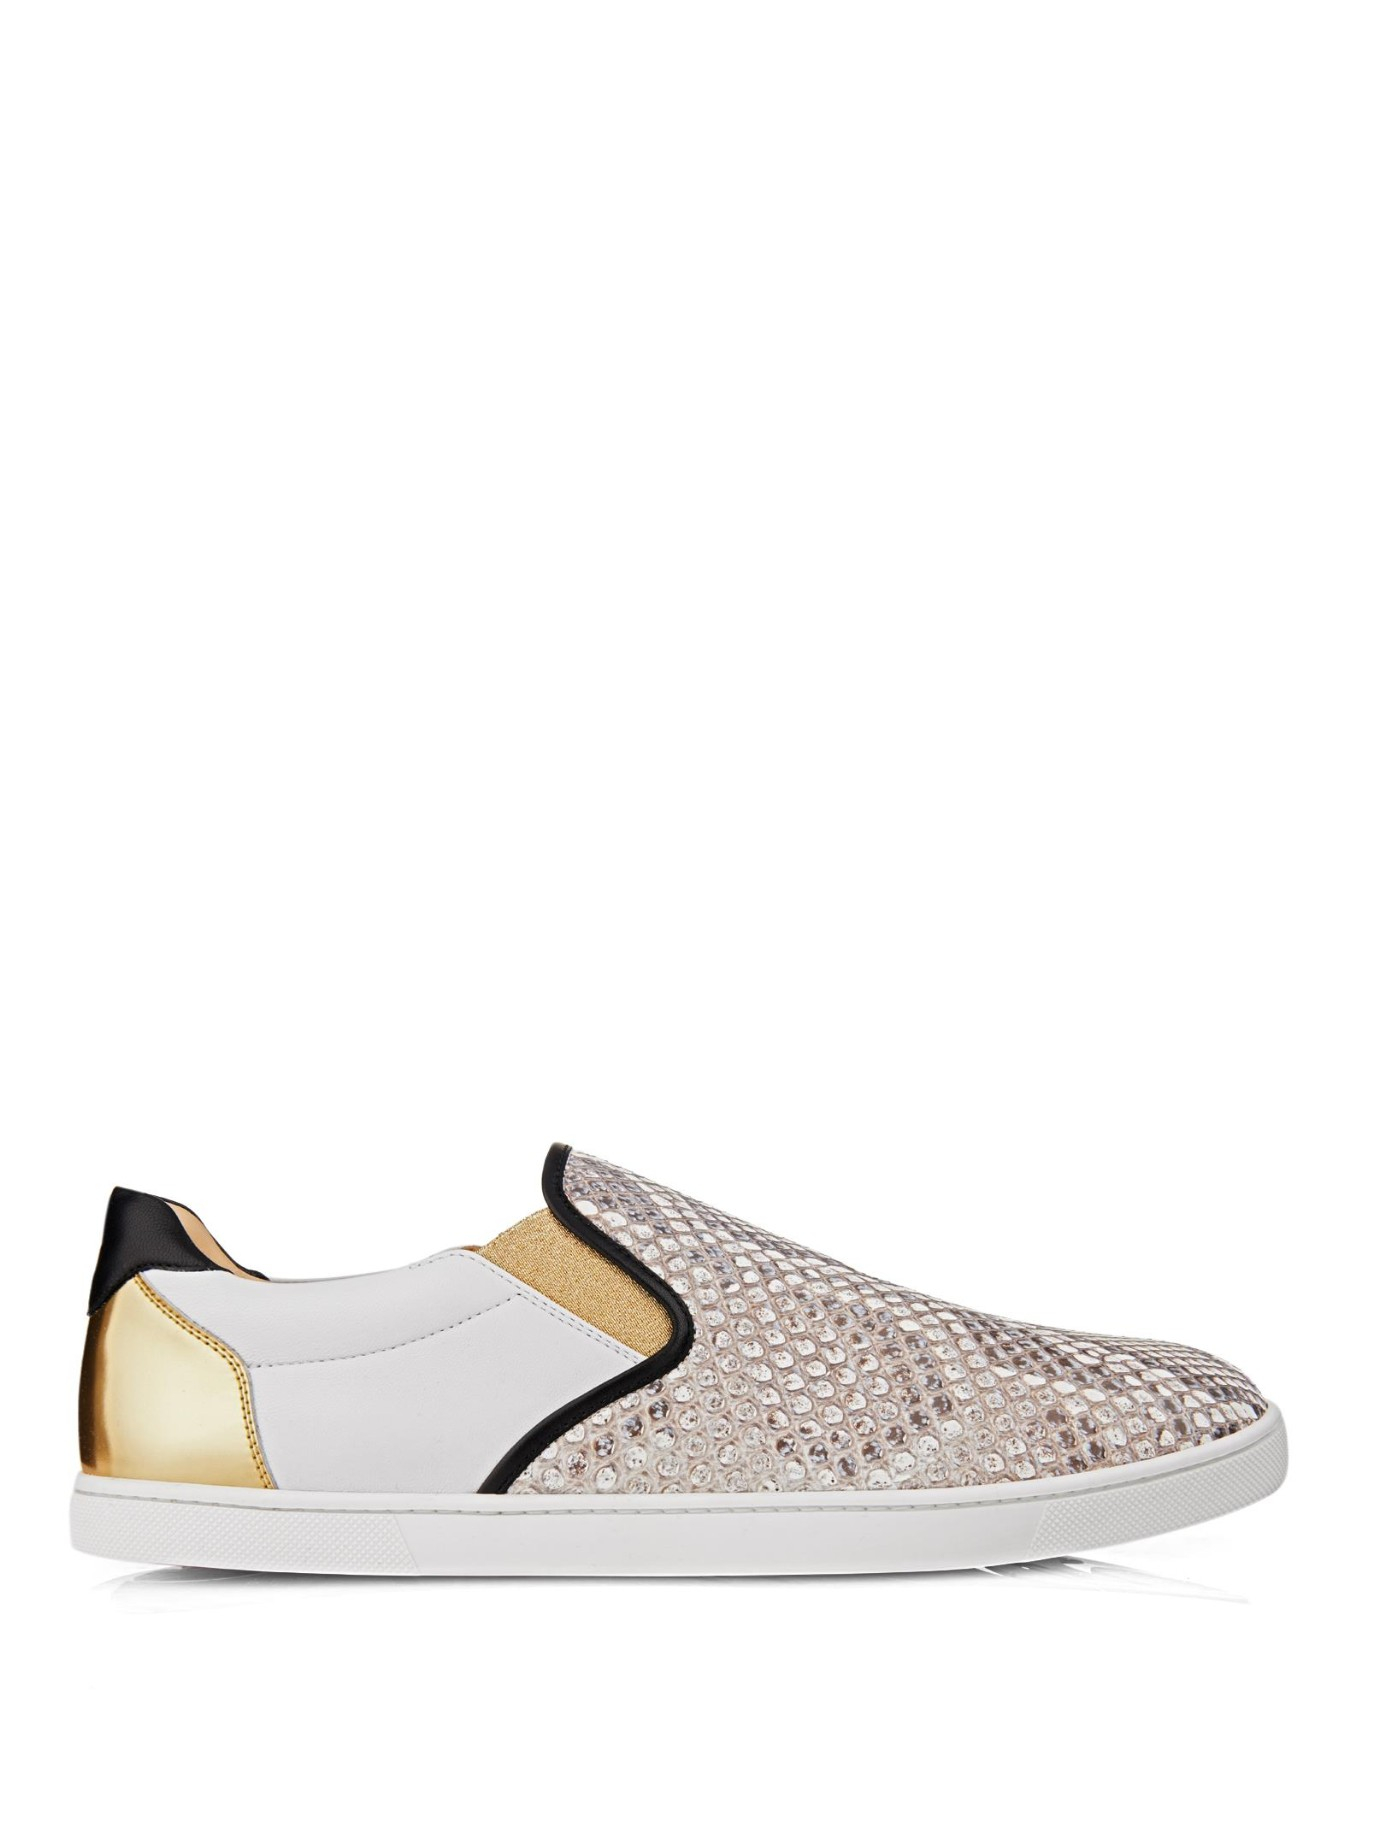 Christian louboutin Sailor Python And Leather Skate Shoes in Gold ...